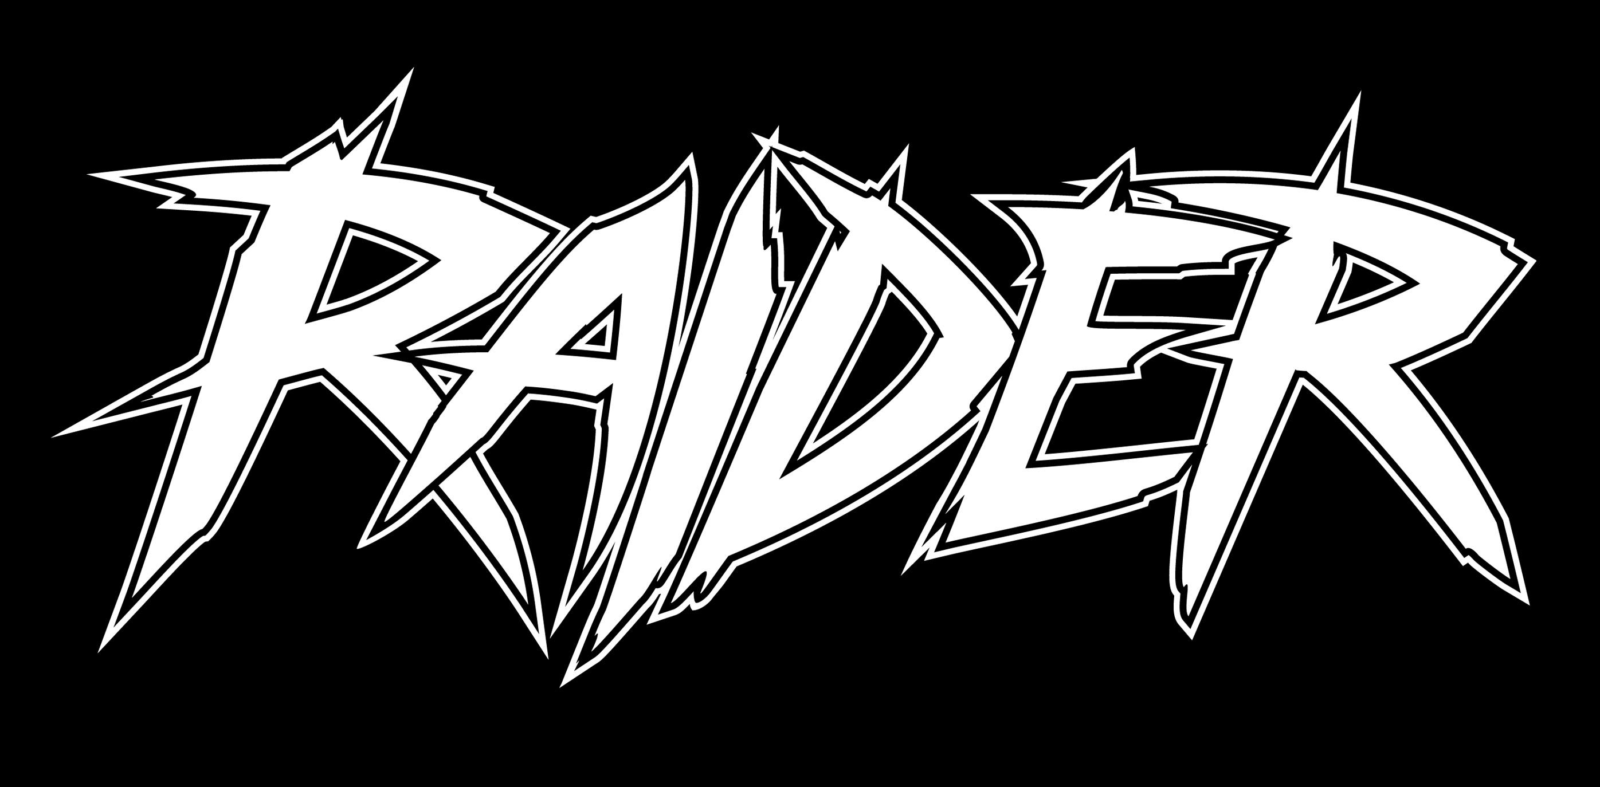 Raider Band of the Month • TotalRock